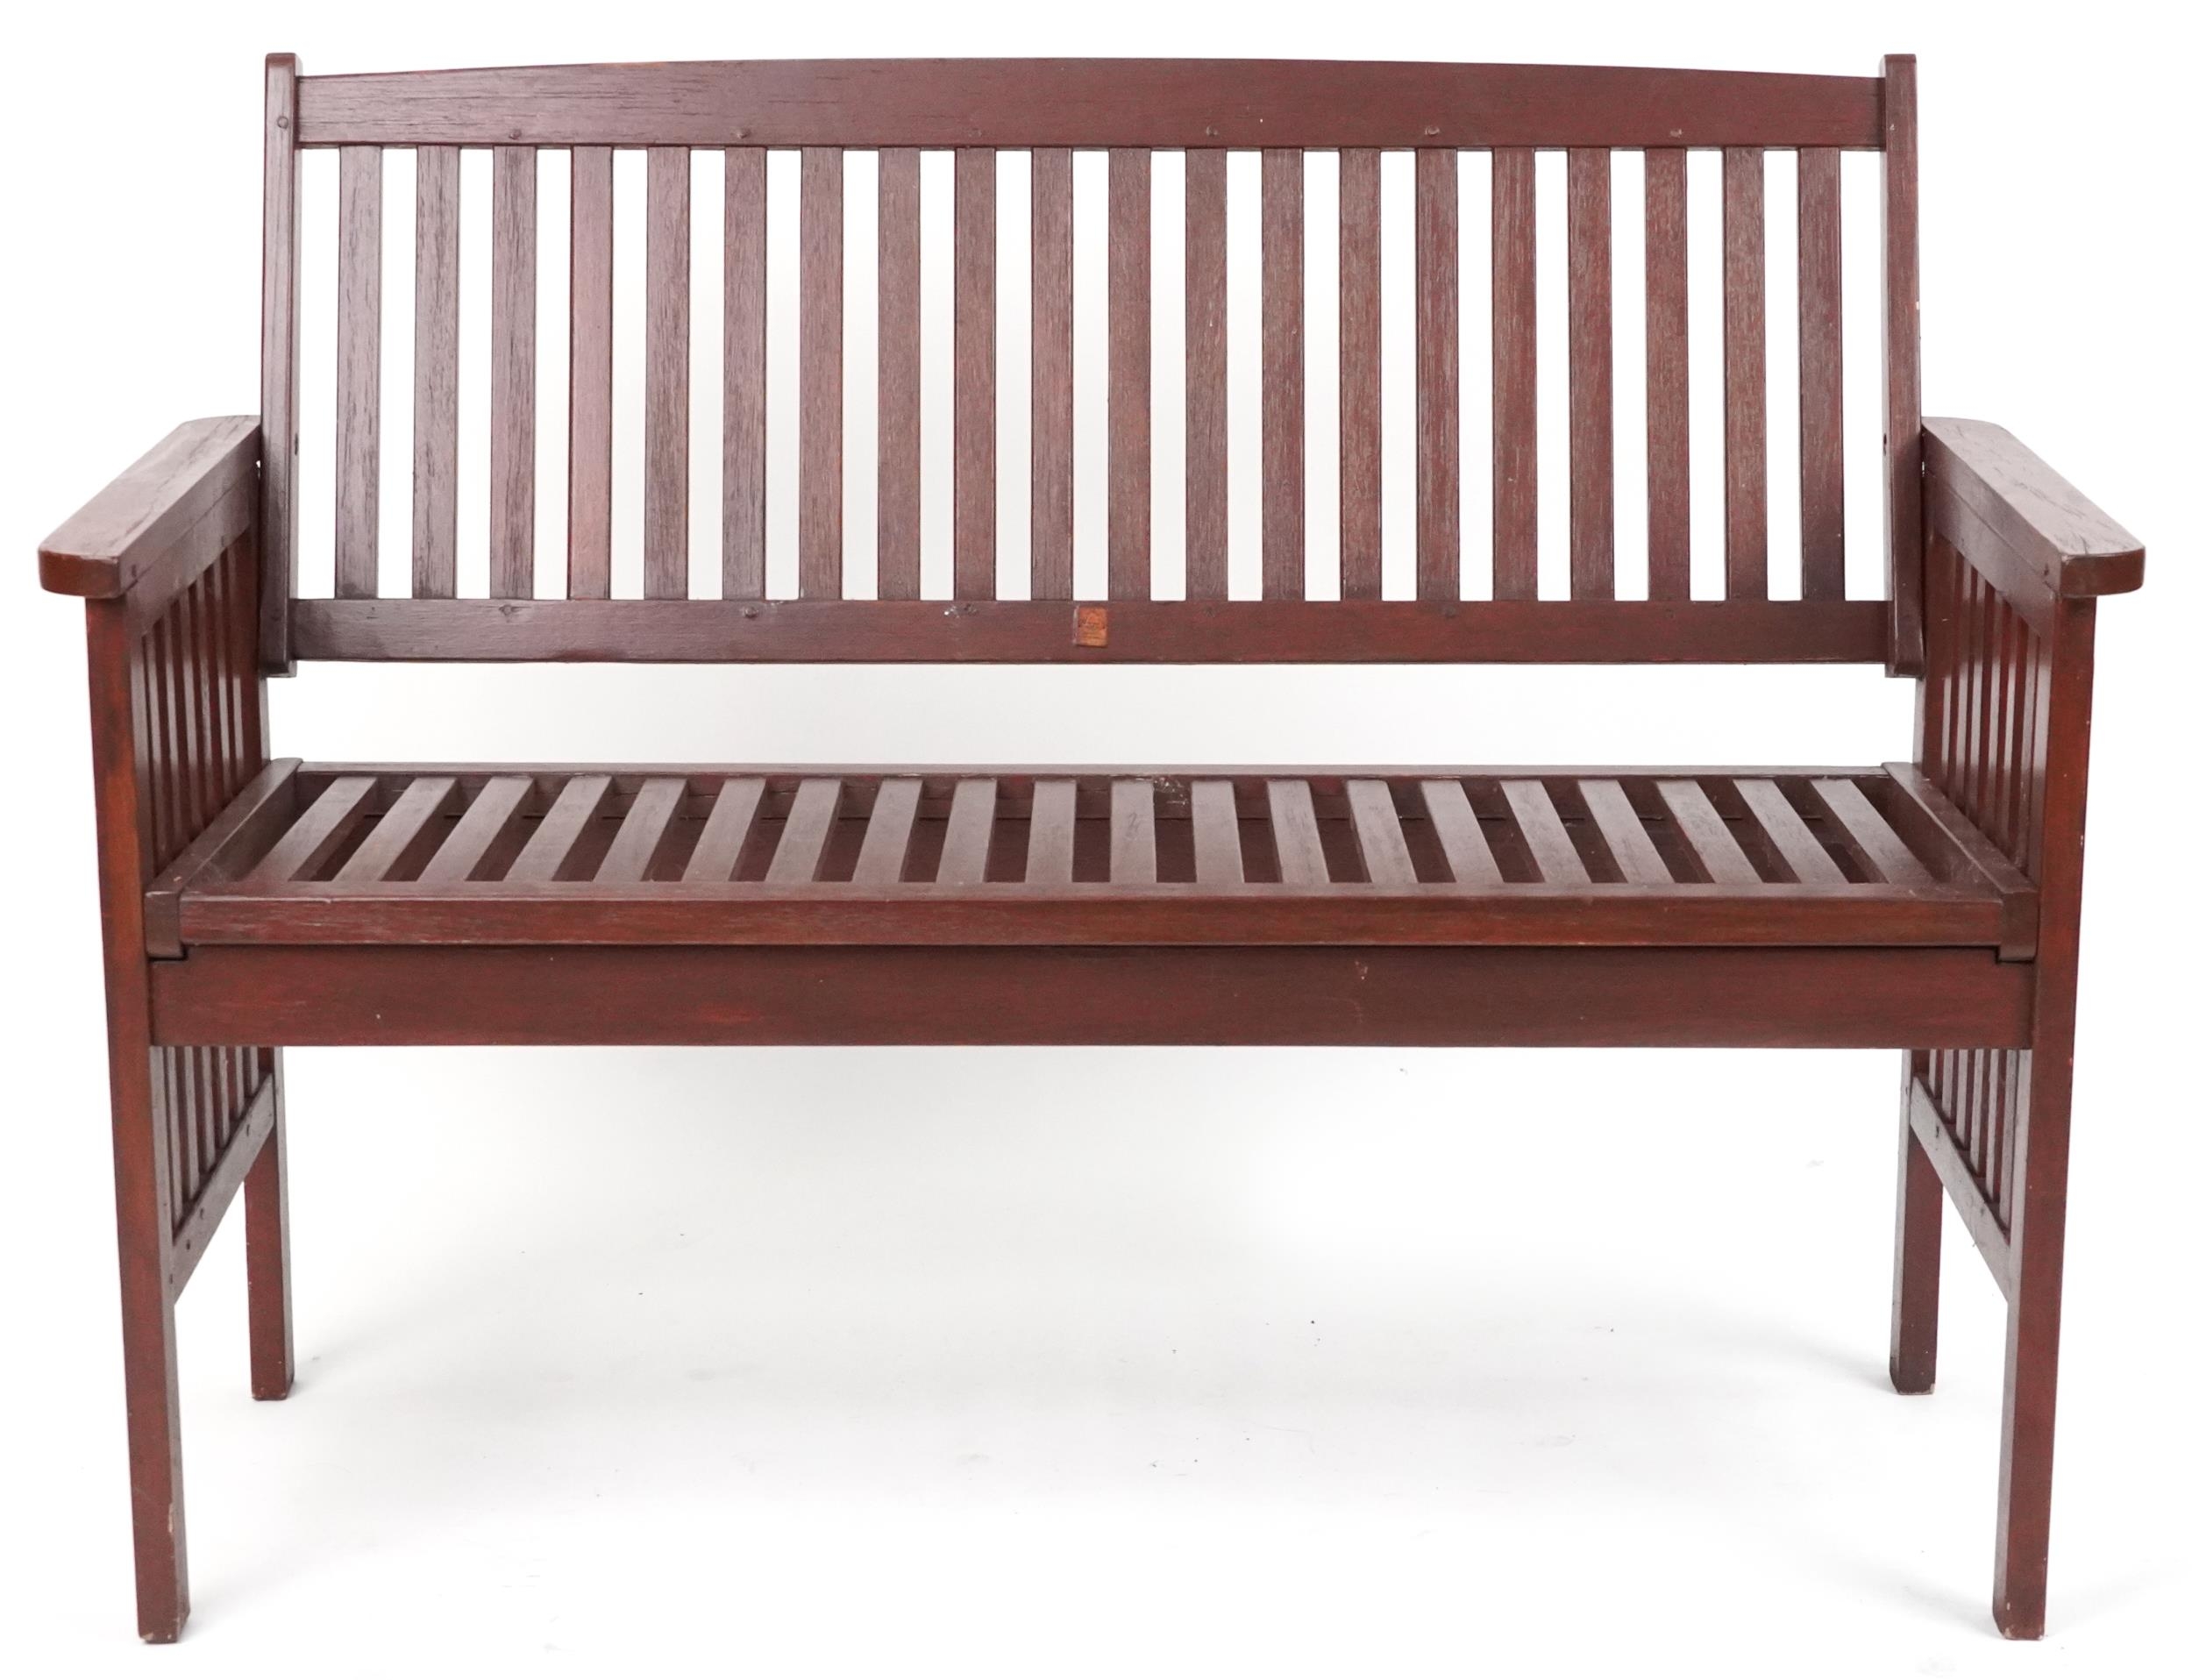 Stained teak slatted garden bench, 89cm H x 118.5cm W x 58cm D - Image 2 of 5